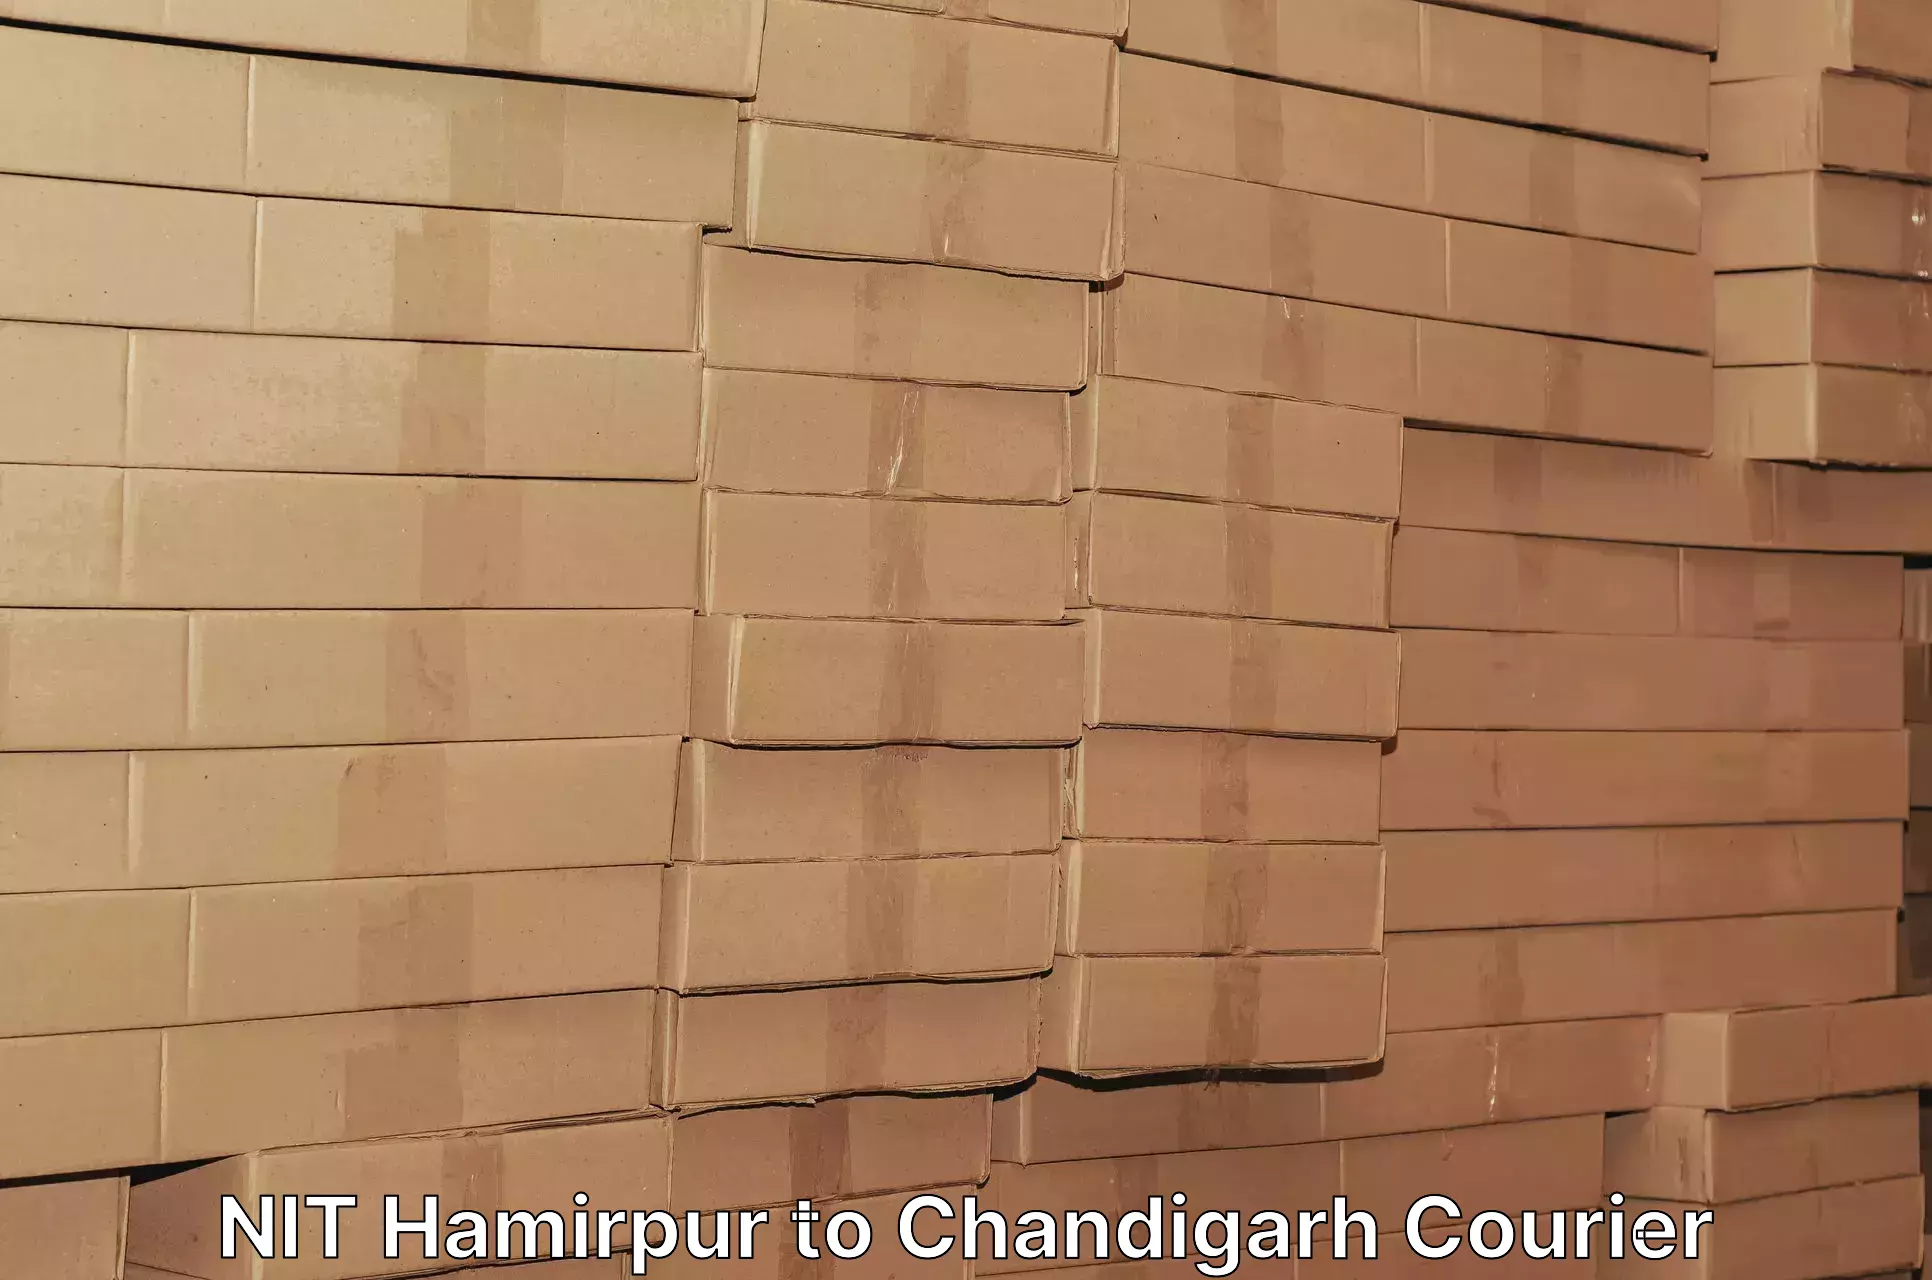 State-of-the-art courier technology NIT Hamirpur to Chandigarh